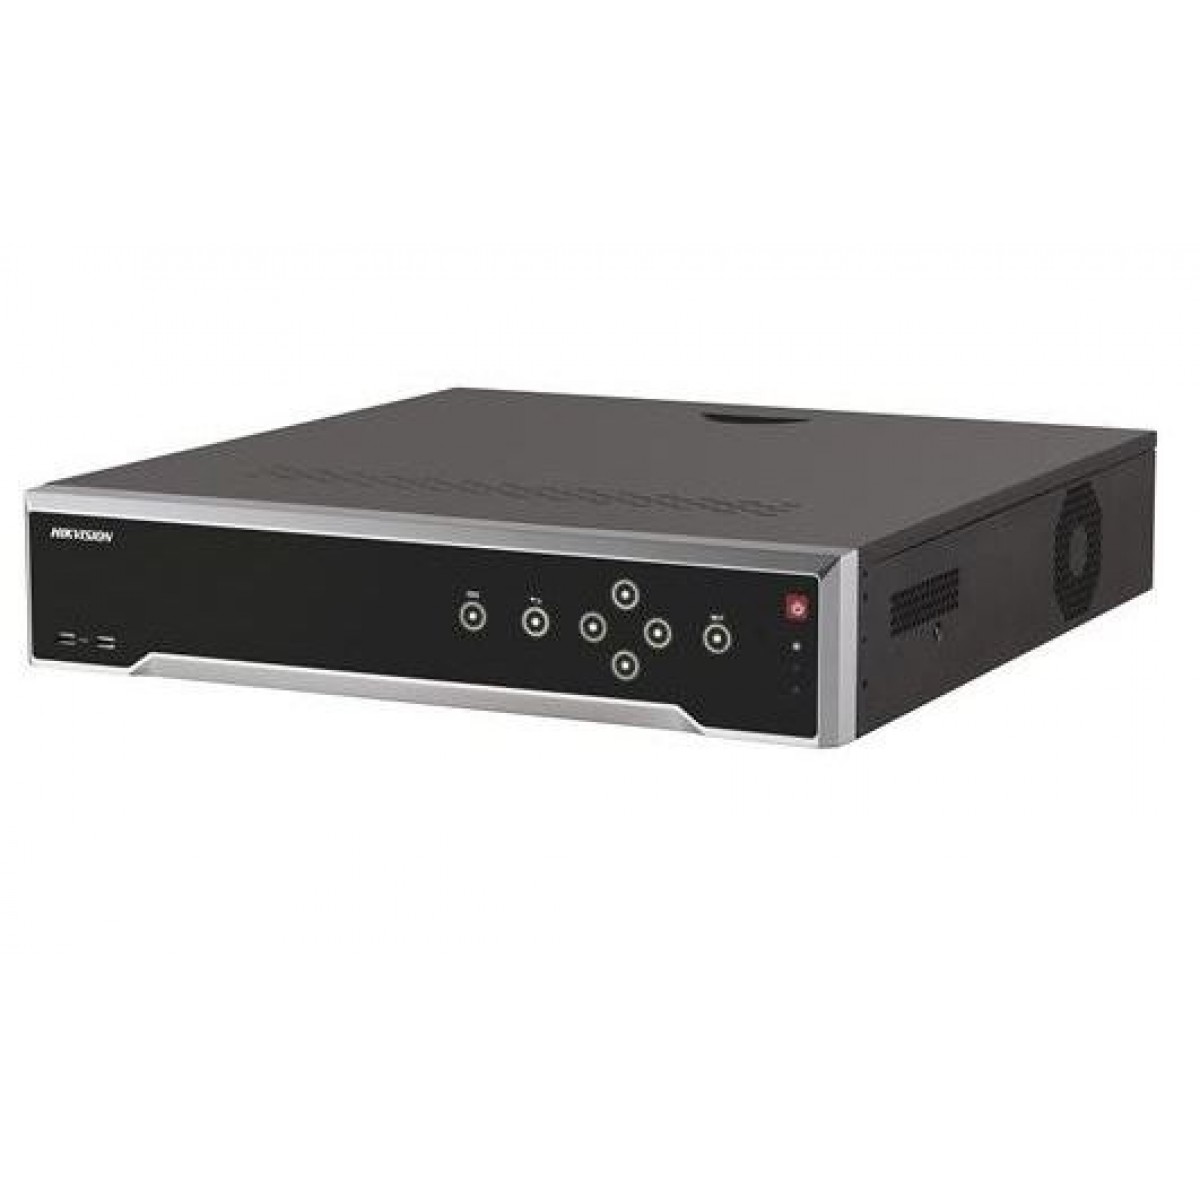 Hikvision DS-7716NI-K4 16 Channel 4 HDD Supported NVR